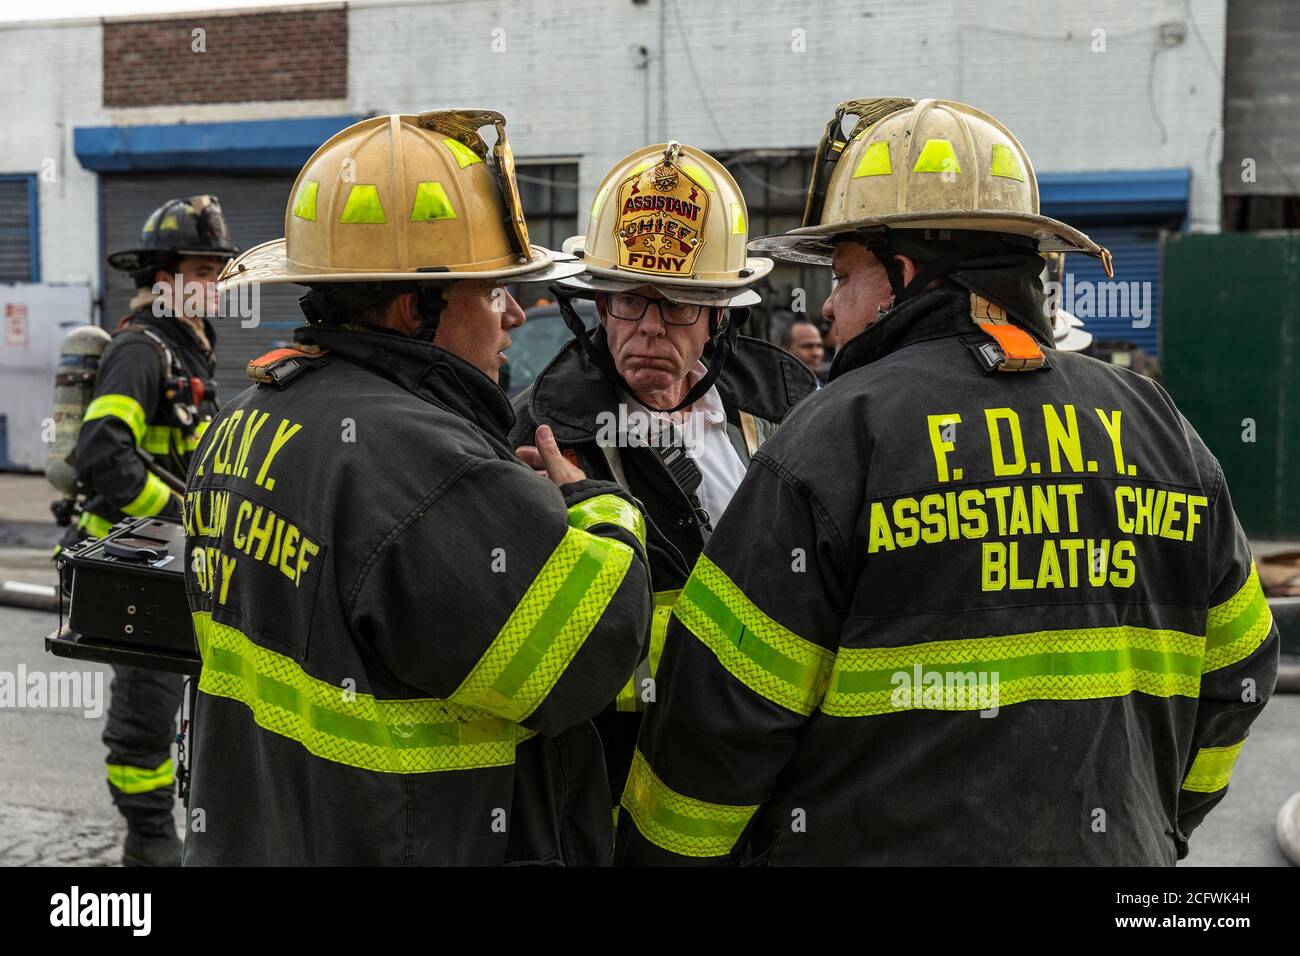 New York, United States. 07th Sep, 2020. Assistant Chief Howy seen where firefighters battle massive salvage yard 4 alarm fire in the Bronx Hunts Point section of New York on September 7, 2020. More than FDNY 70 units with 175 firefighters were involved to tackle the fire. (Photo by Lev Radin/Sipa USA) Credit: Sipa USA/Alamy Live News Stock Photo